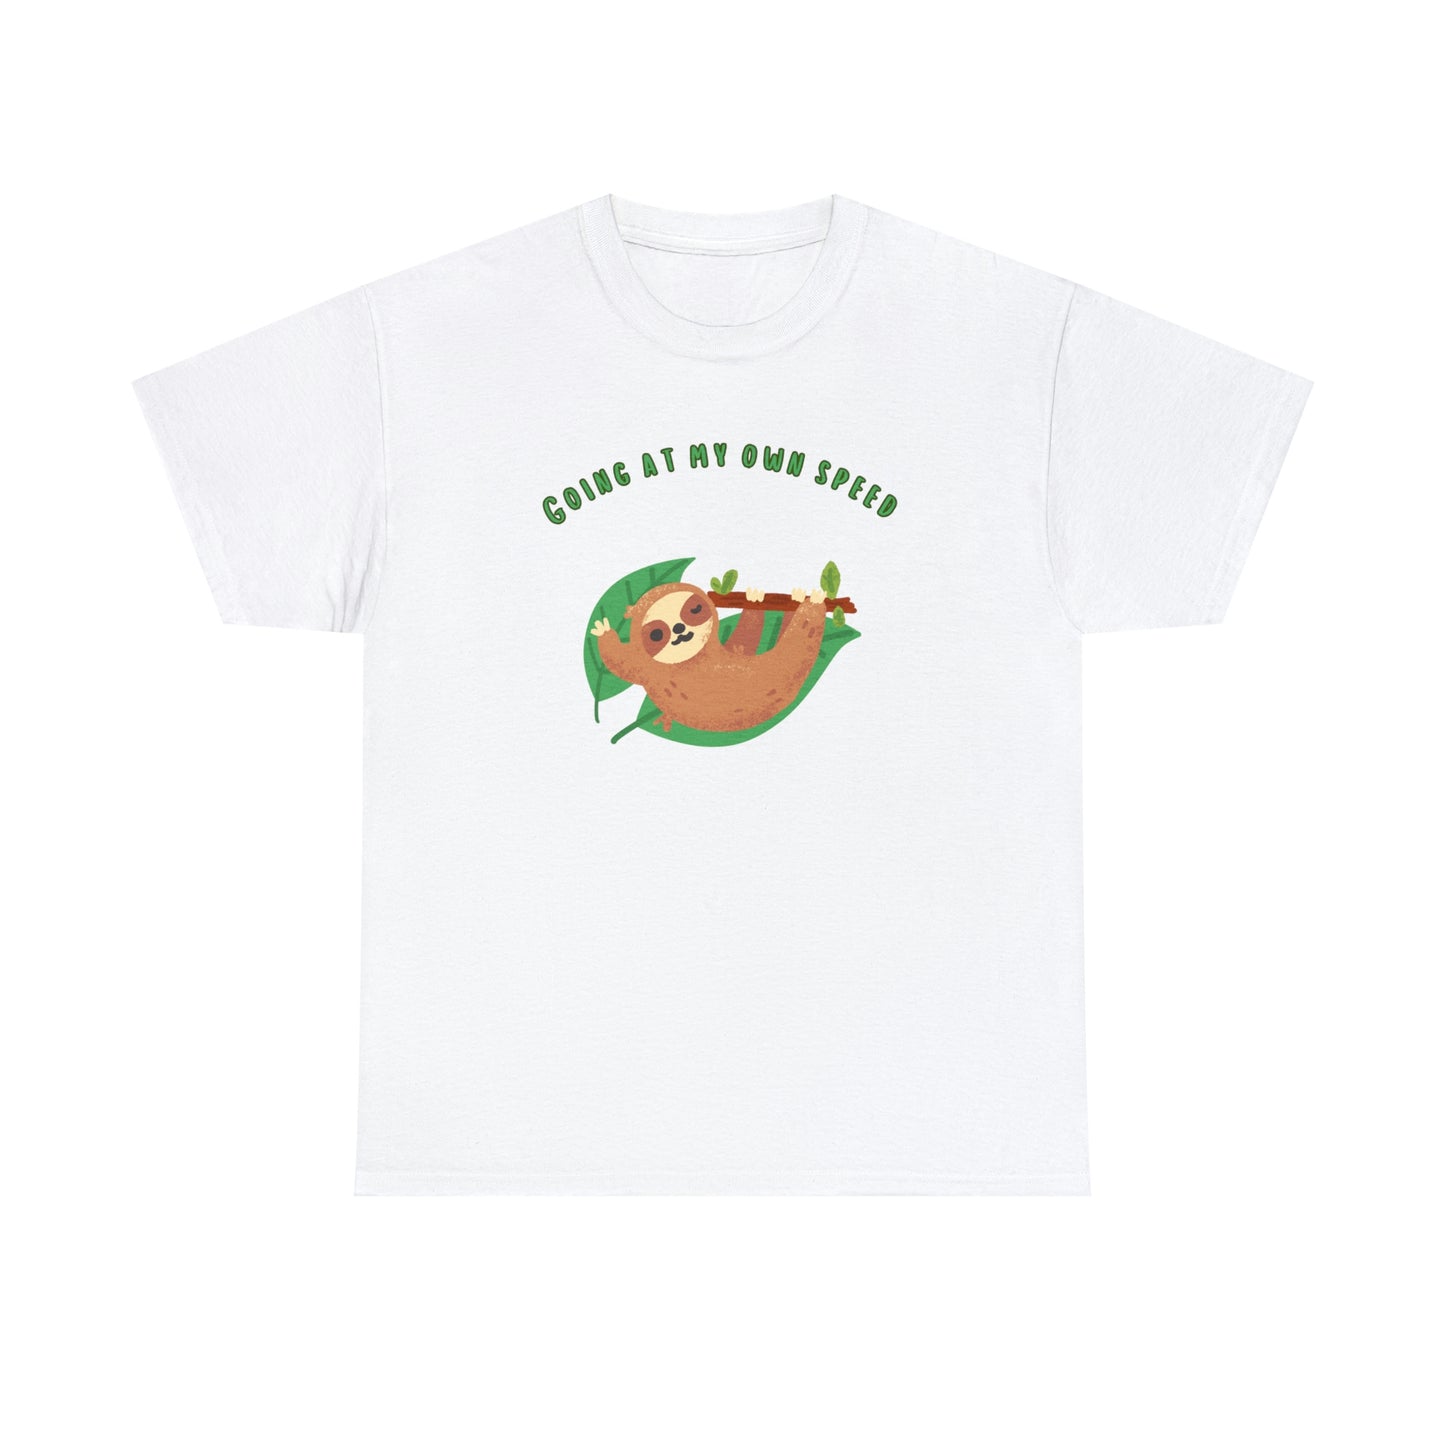 Going at my own speed Tee